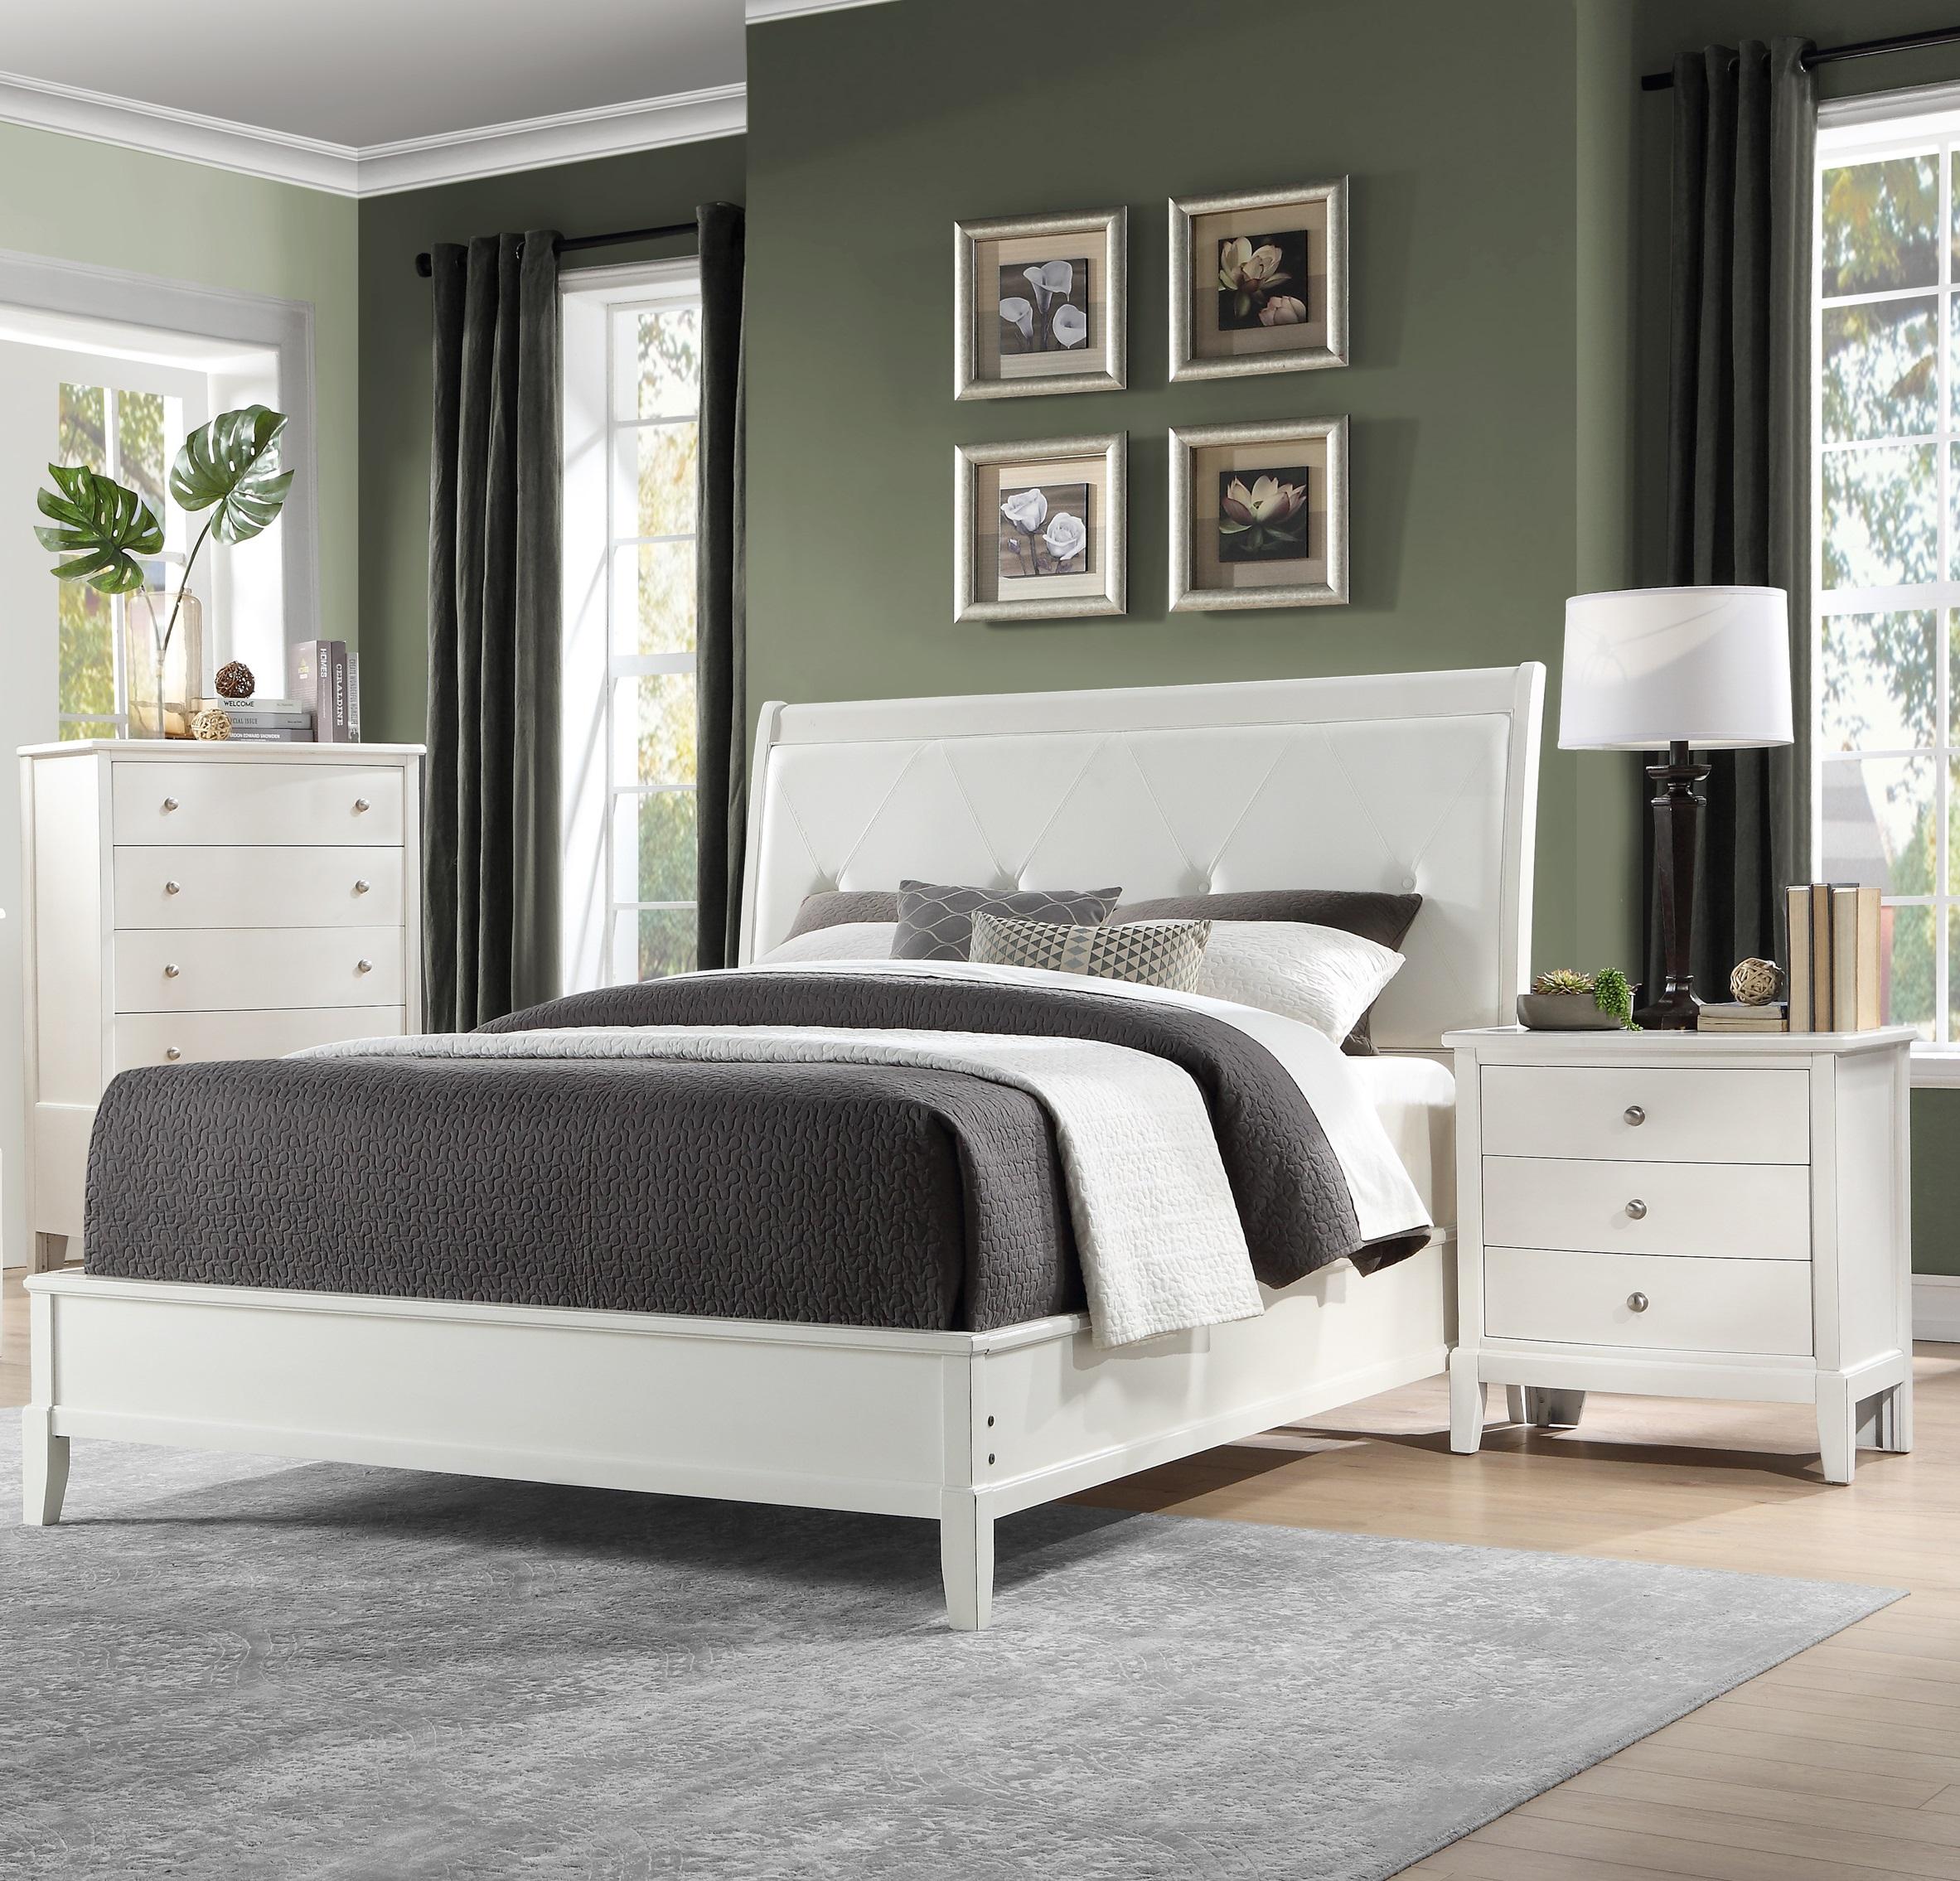 Transitional Bedroom Set 1730KWW-1CK-3PC Cotterill 1730KWW-1CK-3PC in Antique White Faux Leather